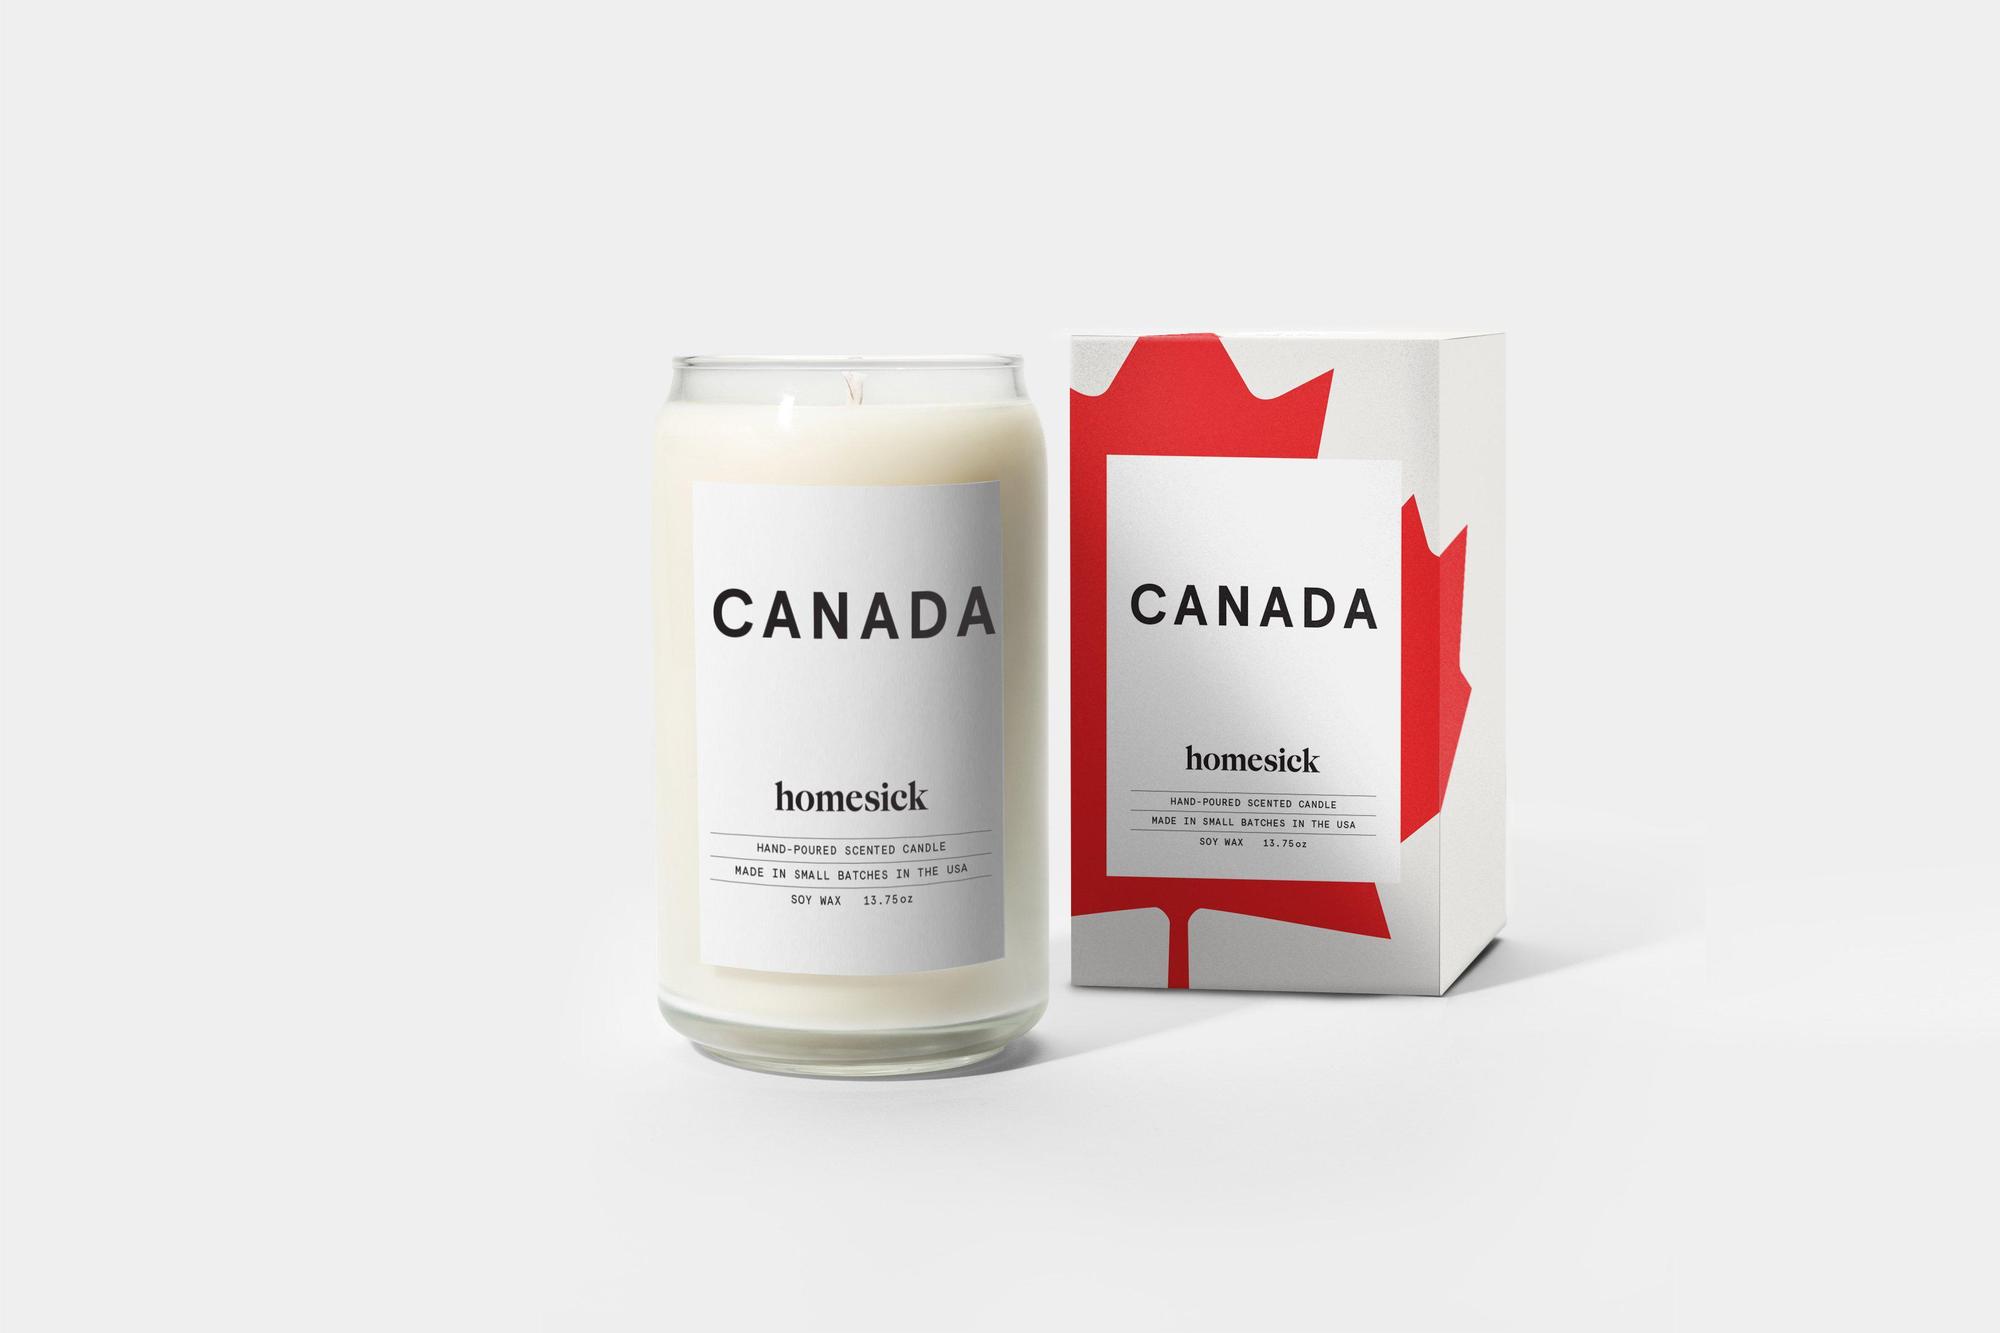 travel-inspired candles